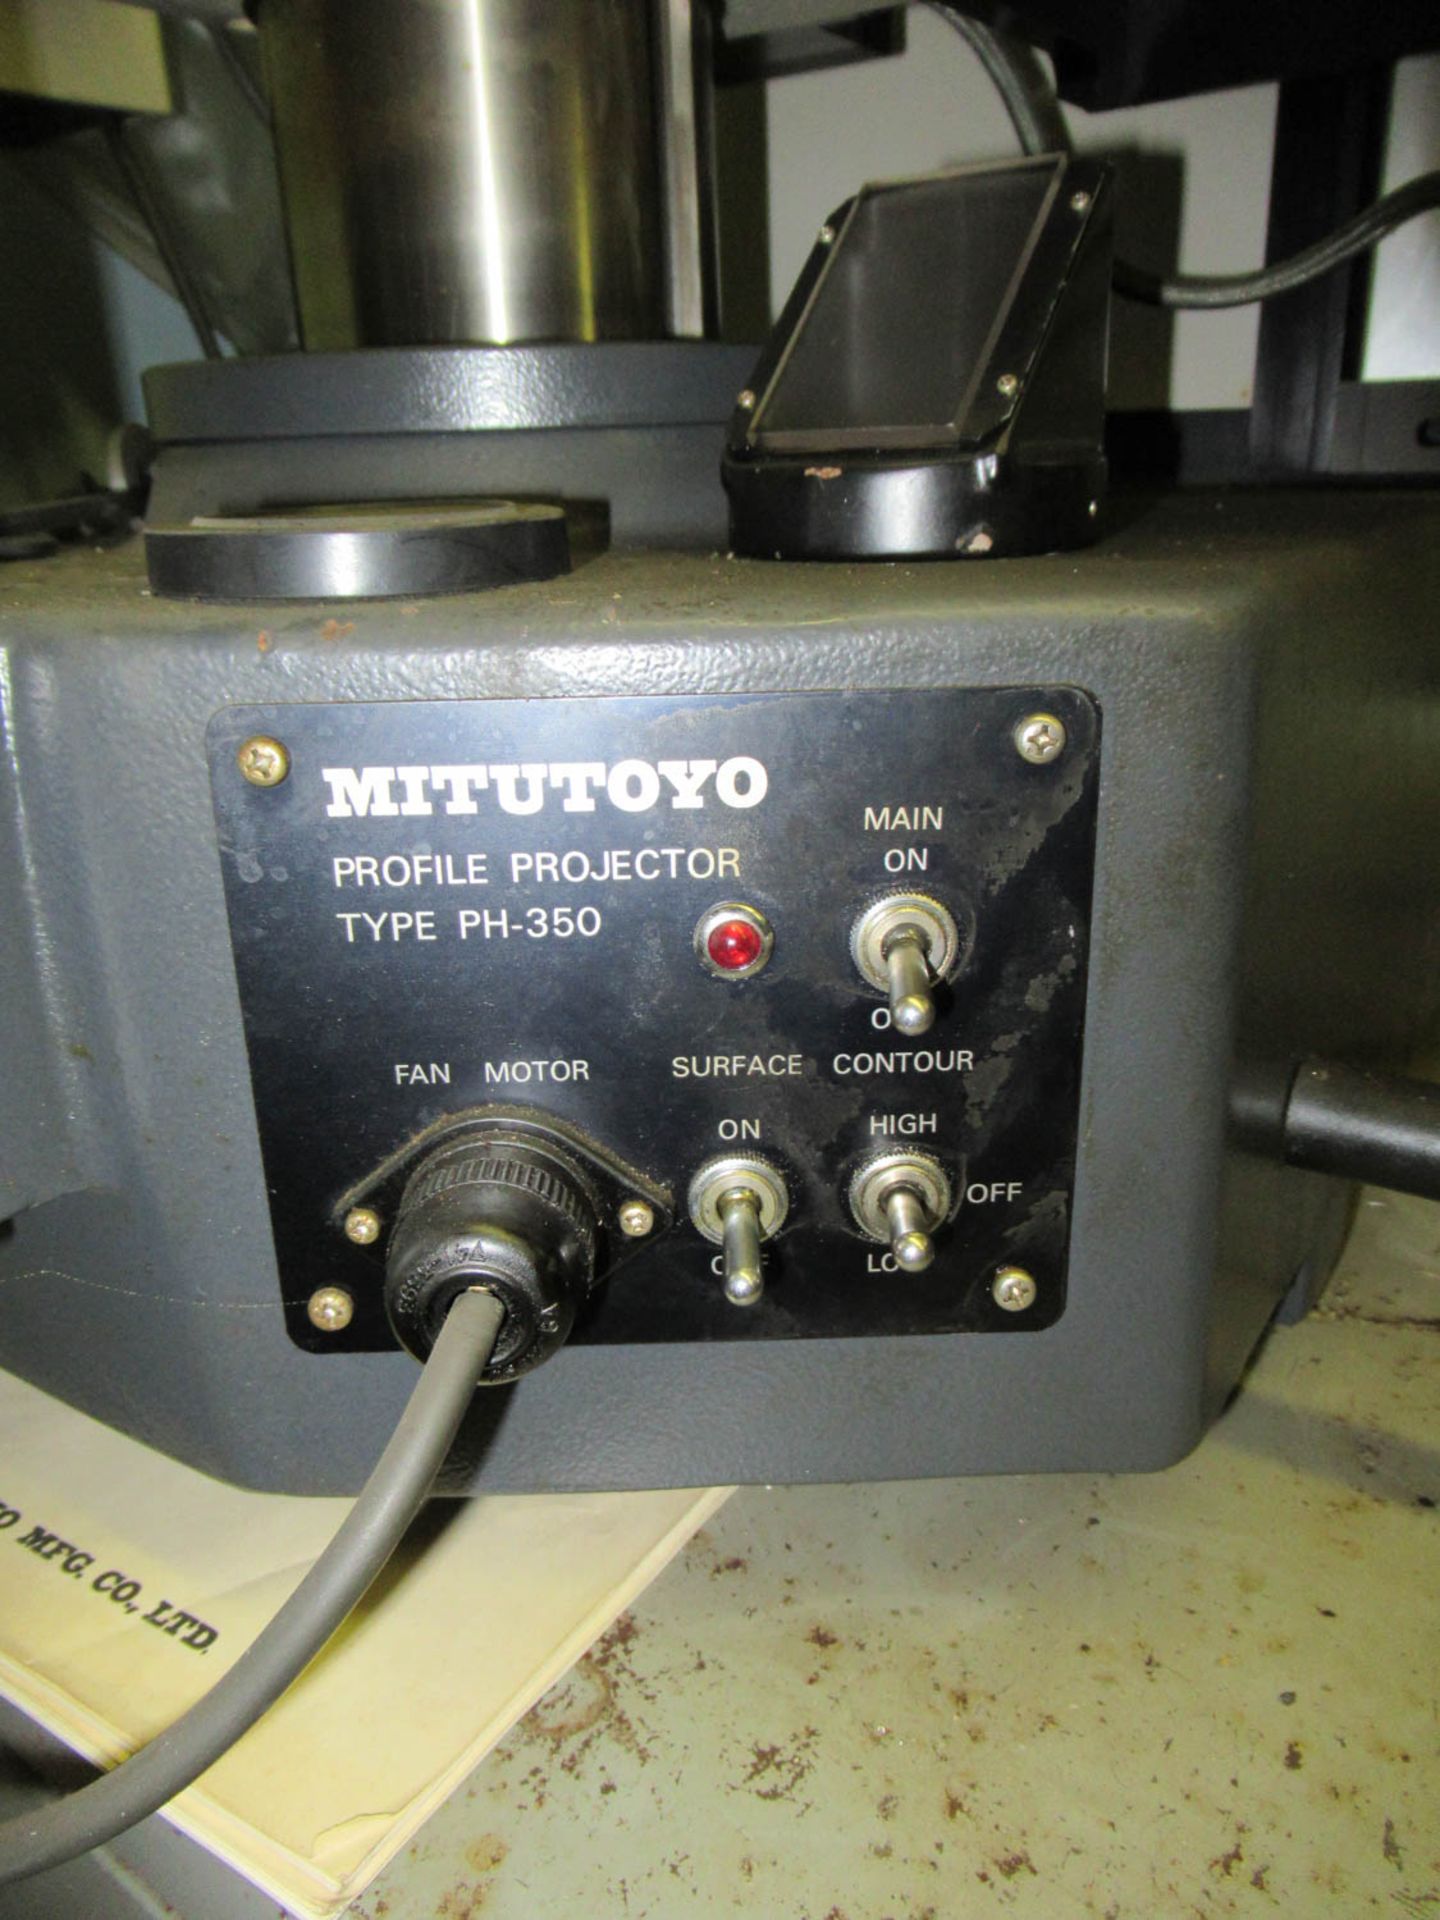 13" MITUTOYO PH-350 COMPARATOR, SURFACE ILLUMINATION, 5-7/8" X 15-3/4" TABLE, MITUTOYO 2-AXIS - Image 6 of 6